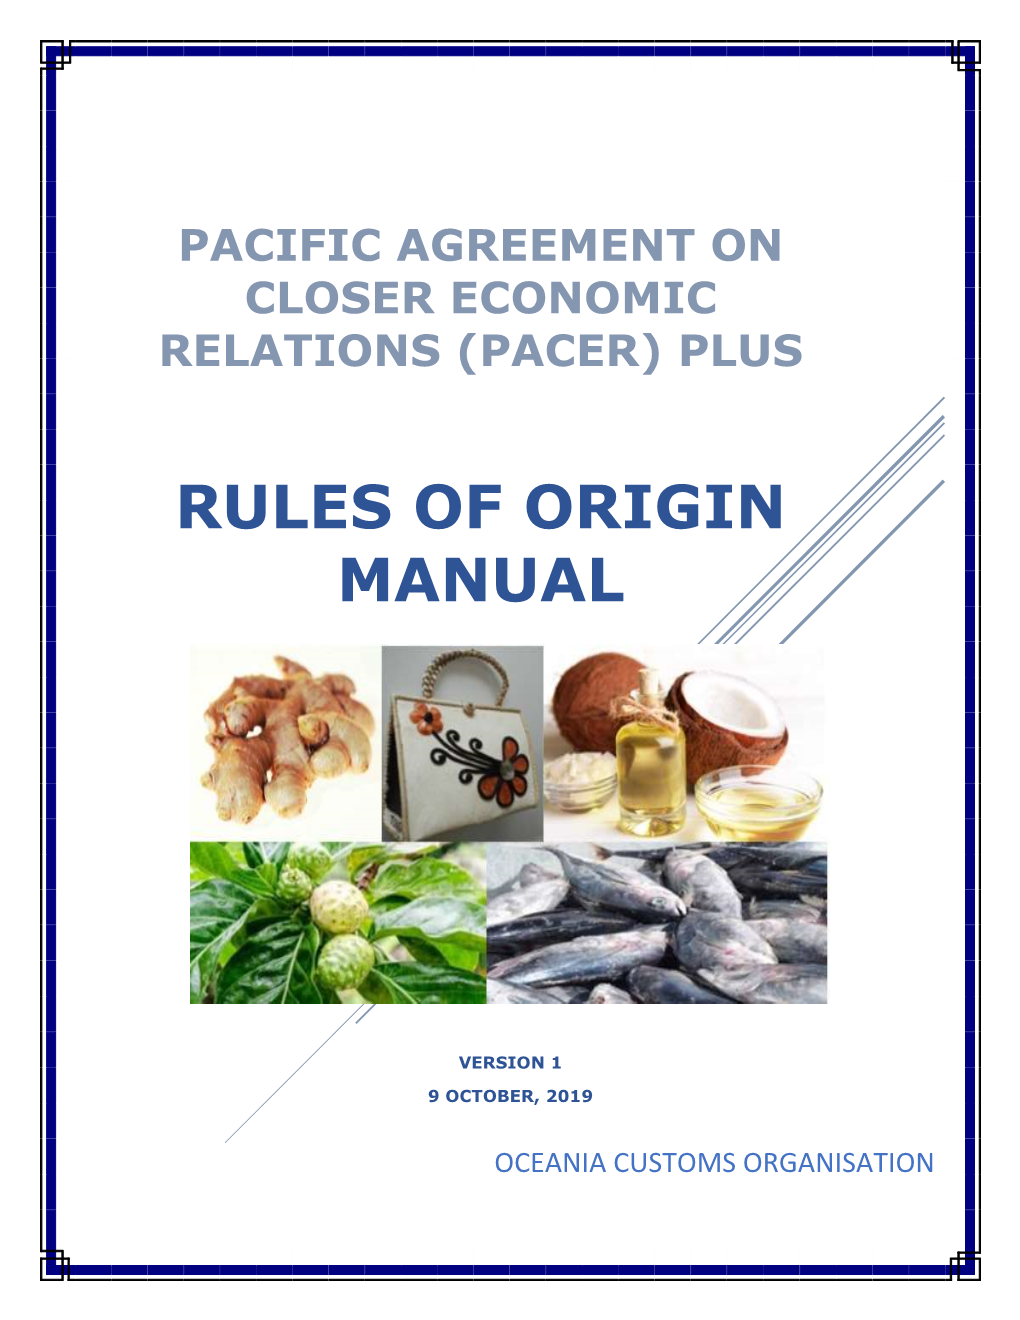 Pacific Agreement on Closer Economic Relations (Pacer)